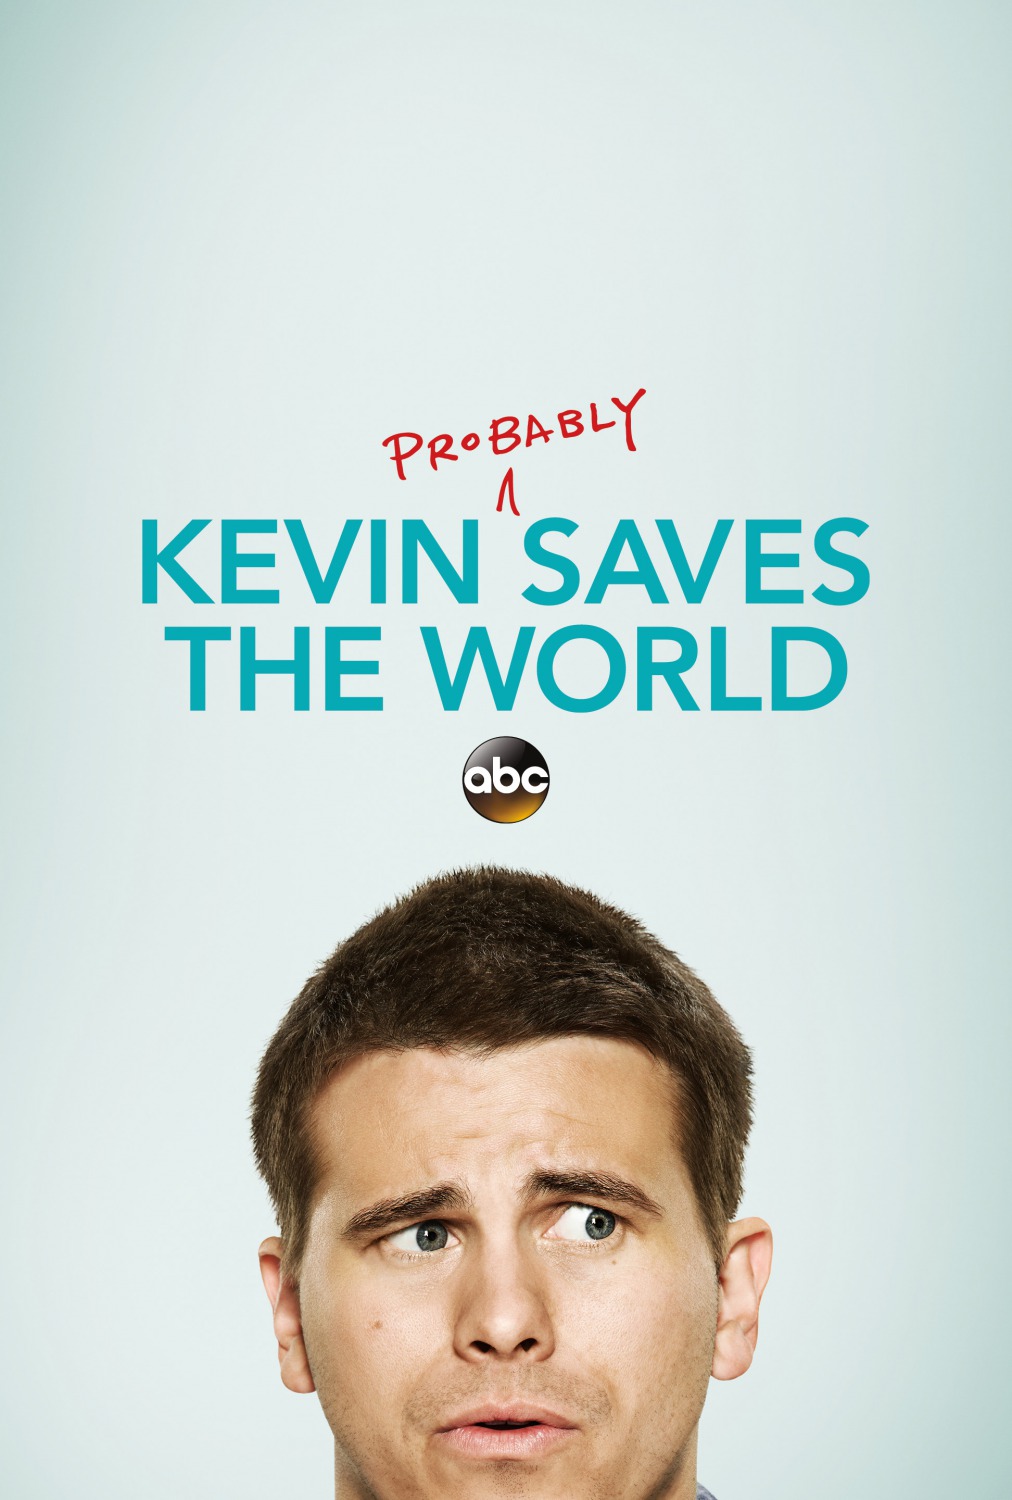 Extra Large TV Poster Image for Kevin (Probably) Saves the World 